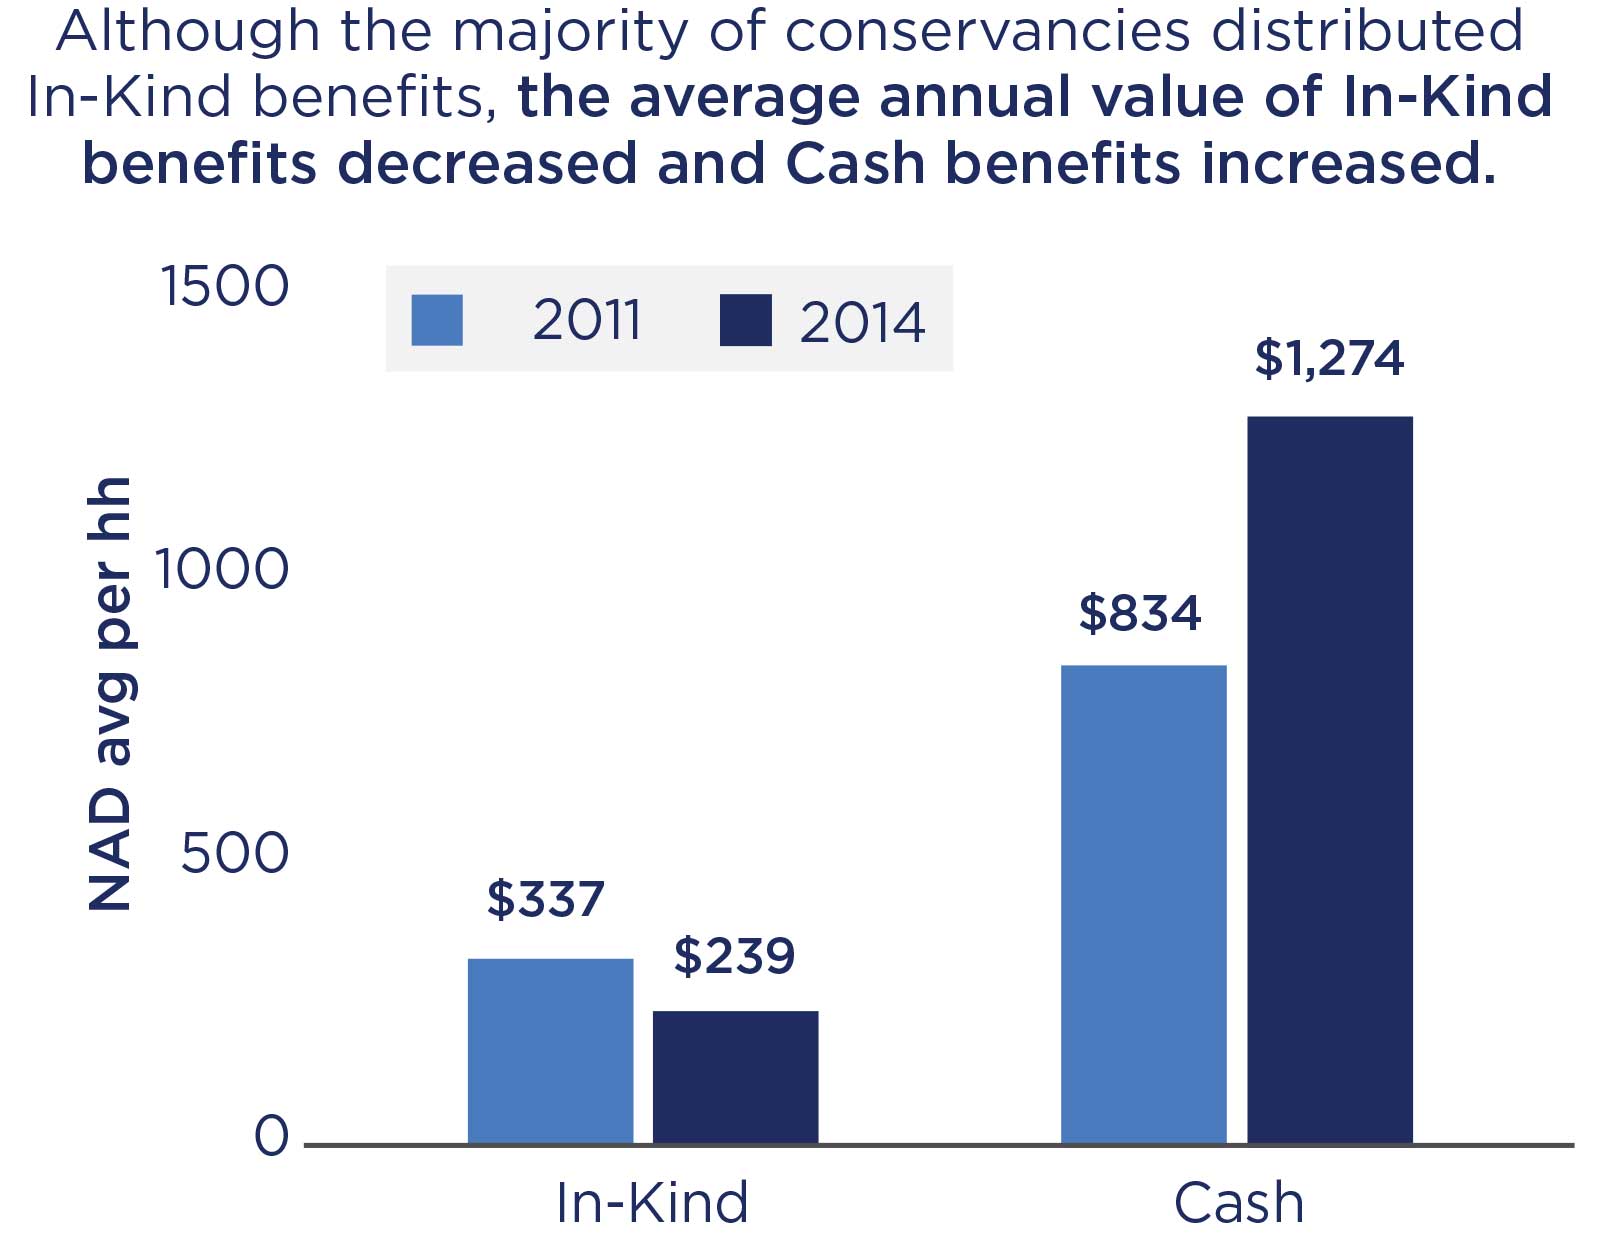 Chart: Although the majority of conservancies distributed In-Kind benefits, the average annual value of In-Kind benefits decreased and Cash benefits increased.